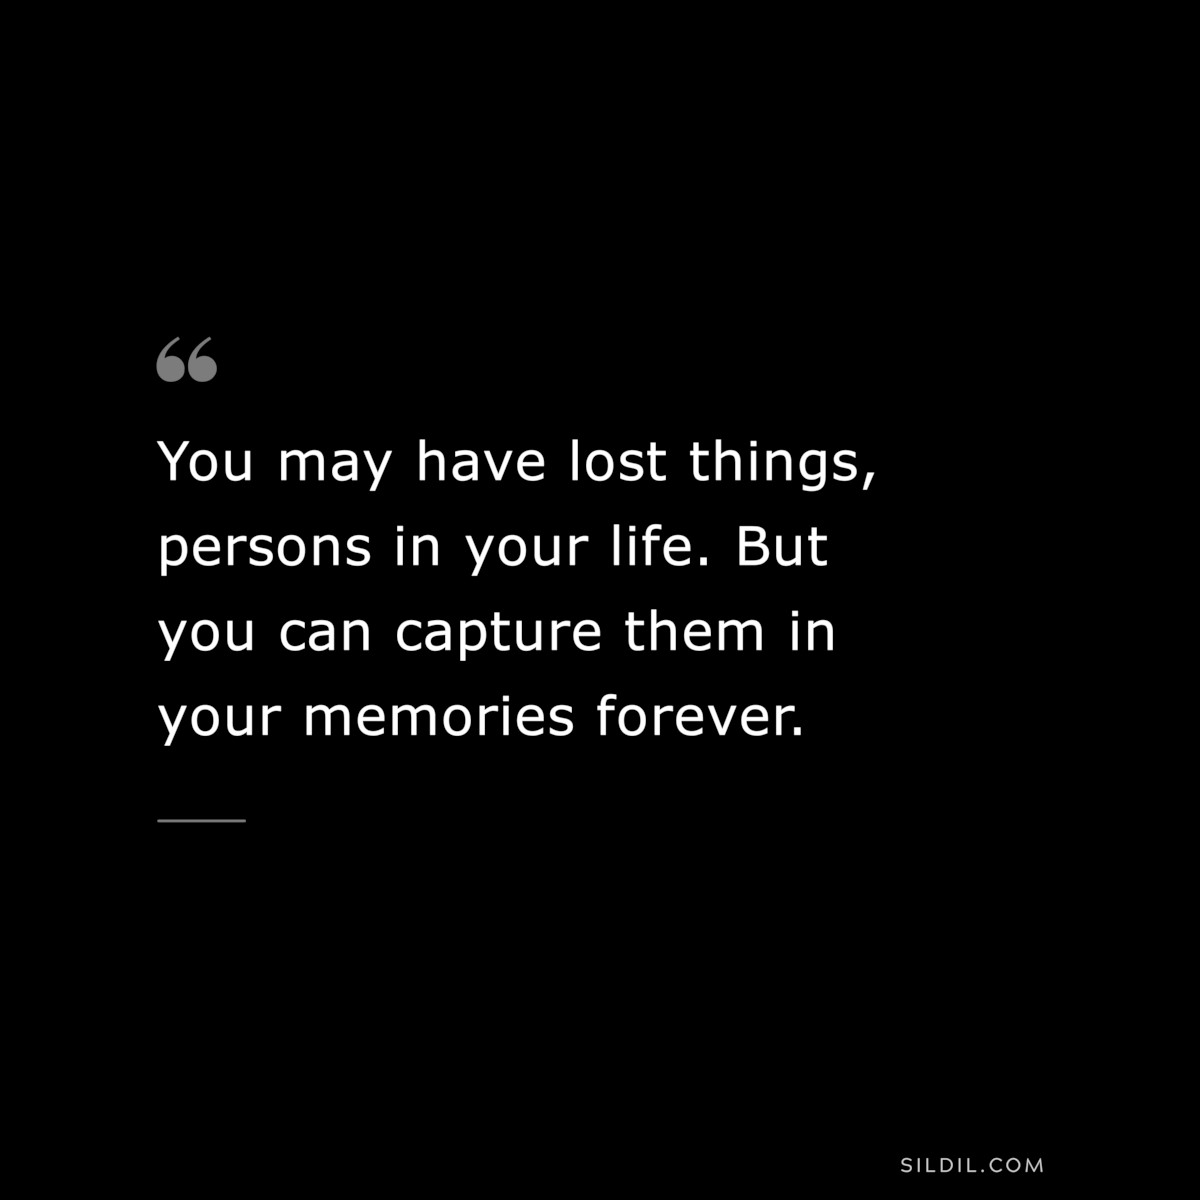 You may have lost things, persons in your life. But you can capture them in your memories forever.